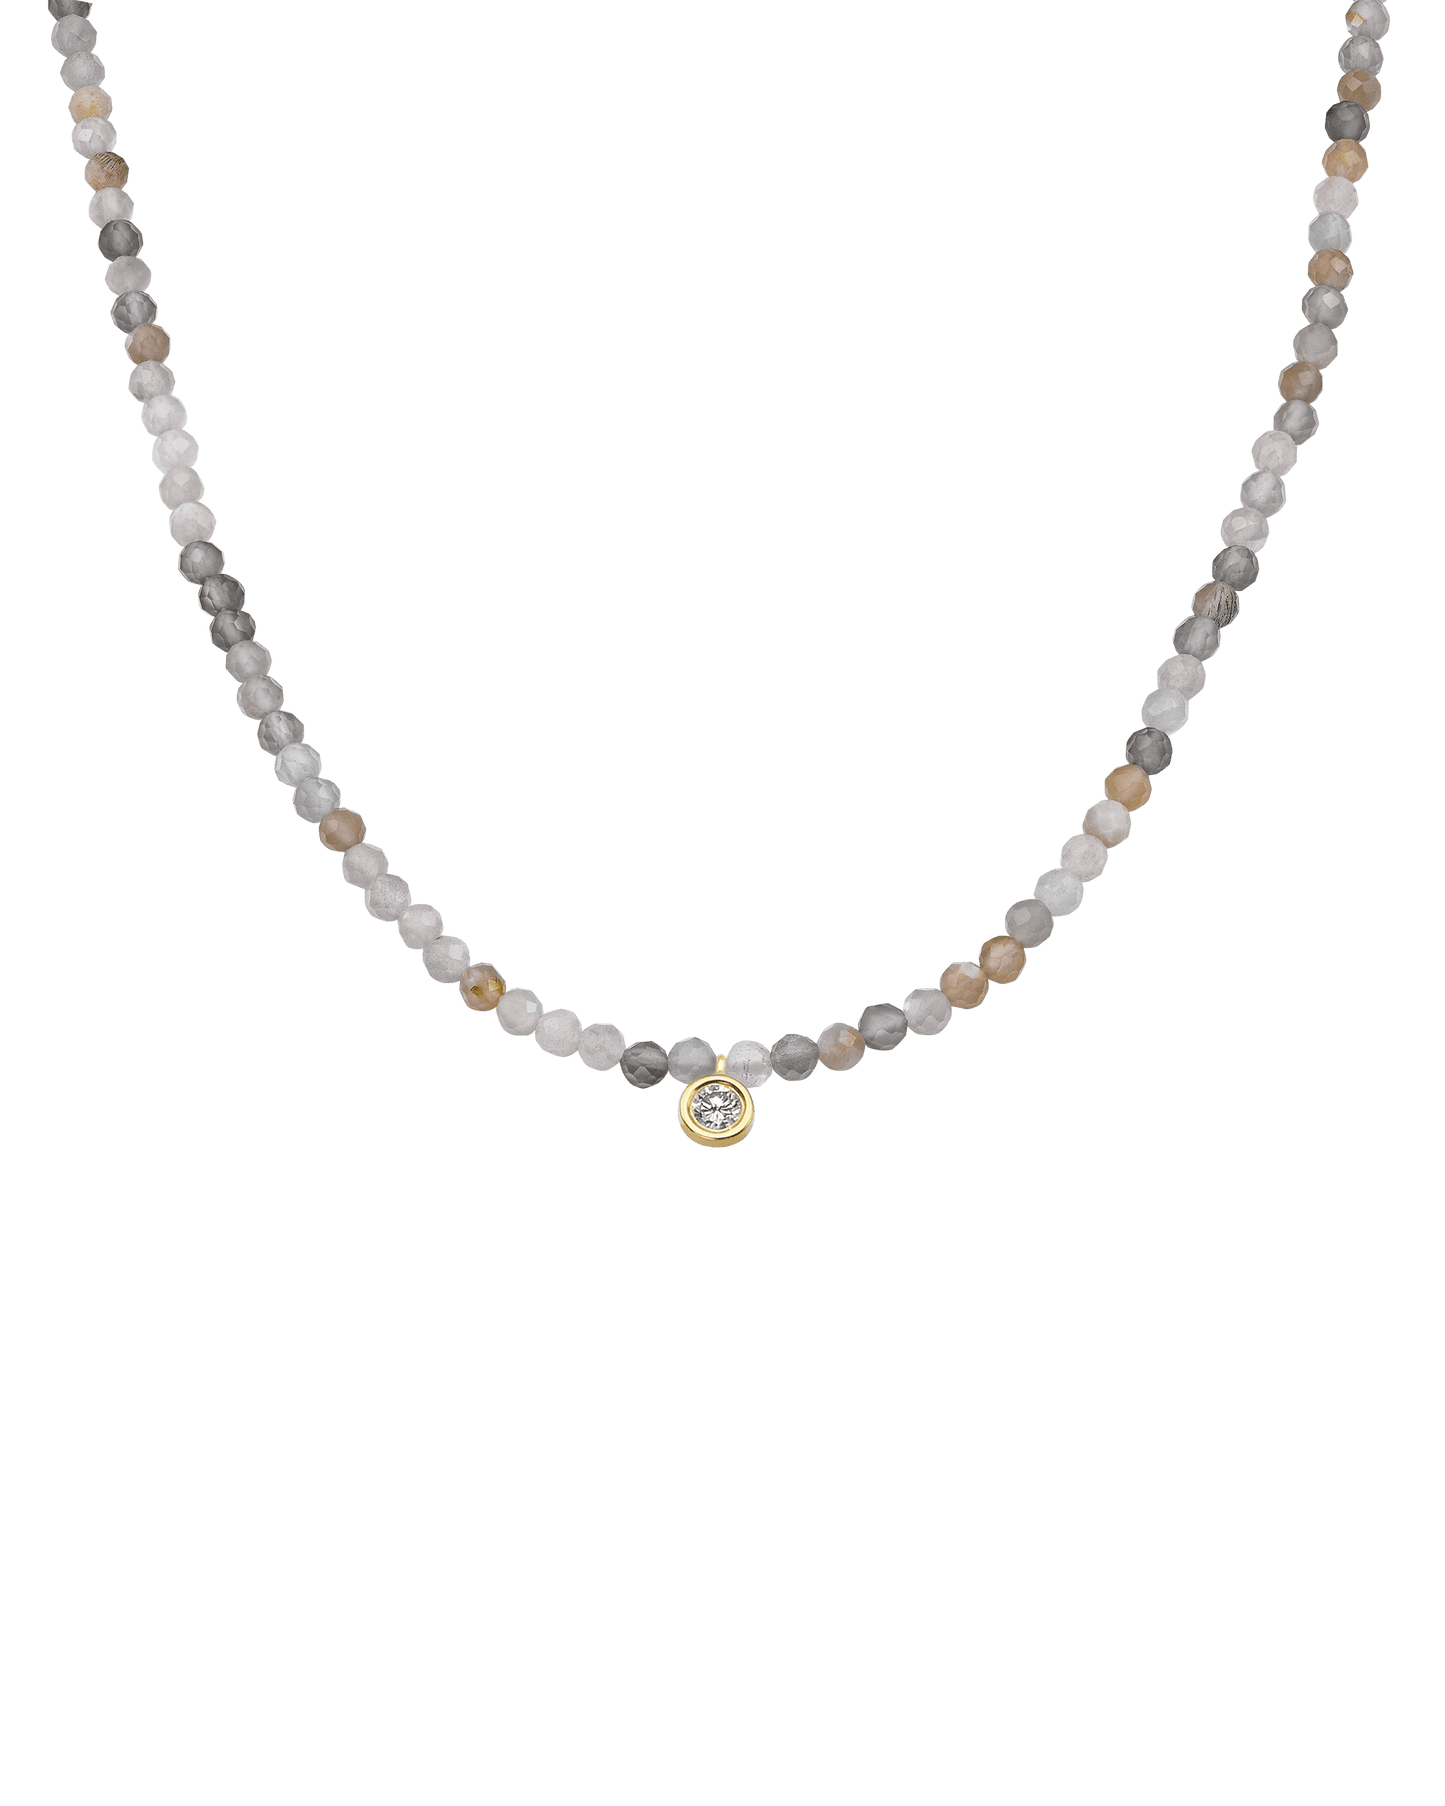 The Gemstone & Diamond Necklace - 14K Yellow Gold Necklaces 14K Solid Gold Natural Moonstone Large: 0.1ct 14"